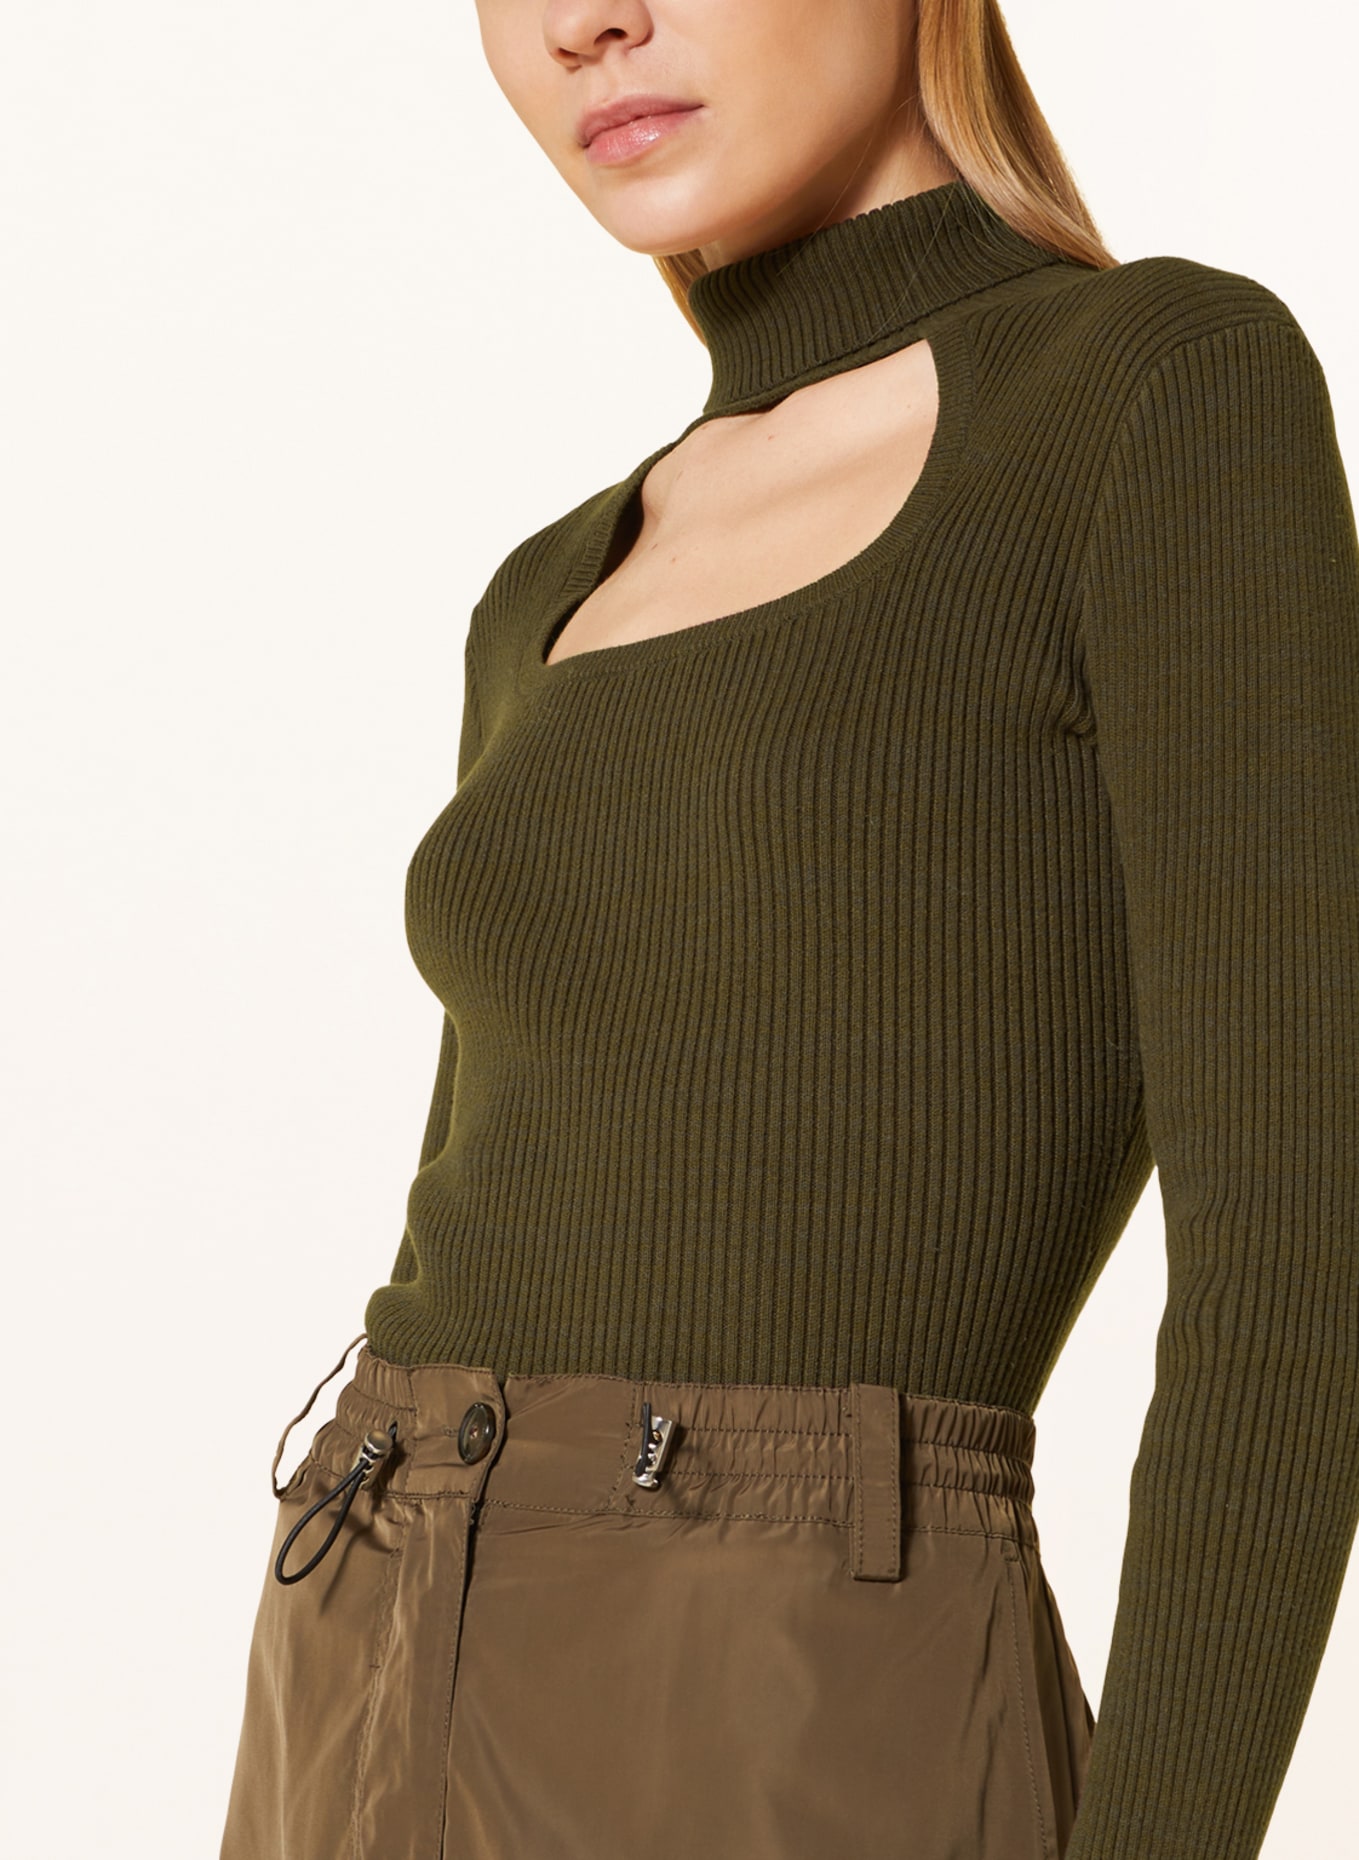 Herskind Turtleneck sweater VITA with cut-out, Color: KHAKI (Image 4)